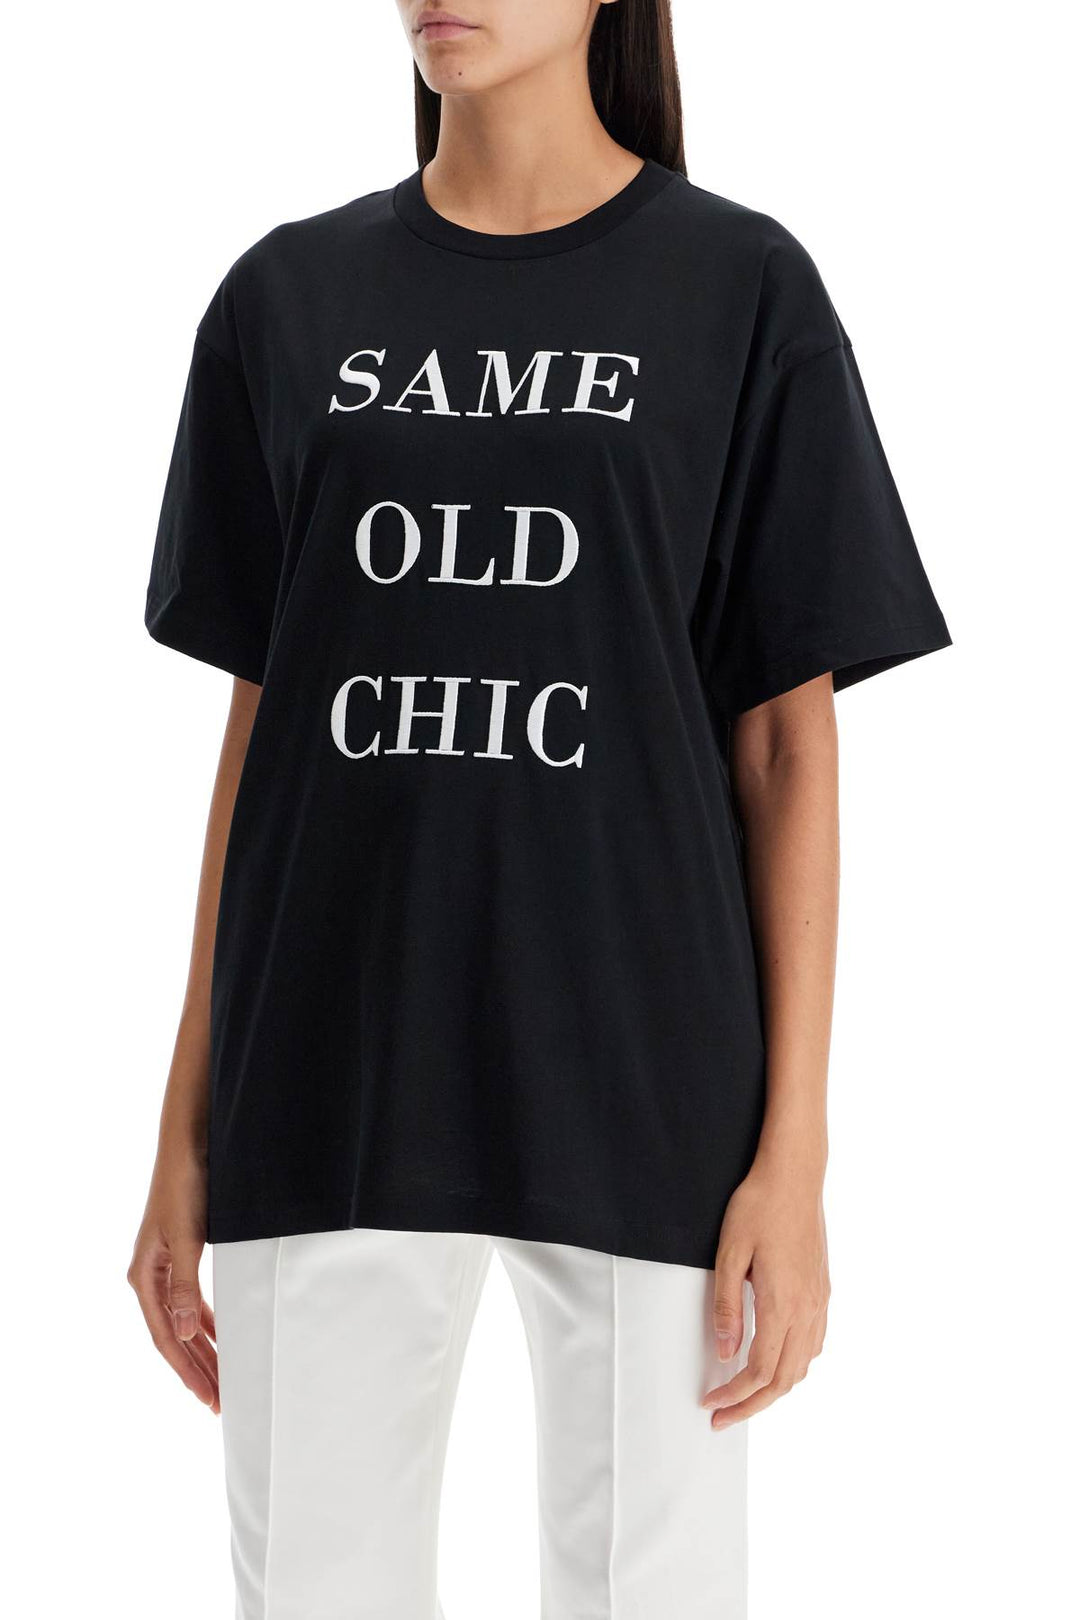 Moschino Oversized T Shirt With Same Old   Black